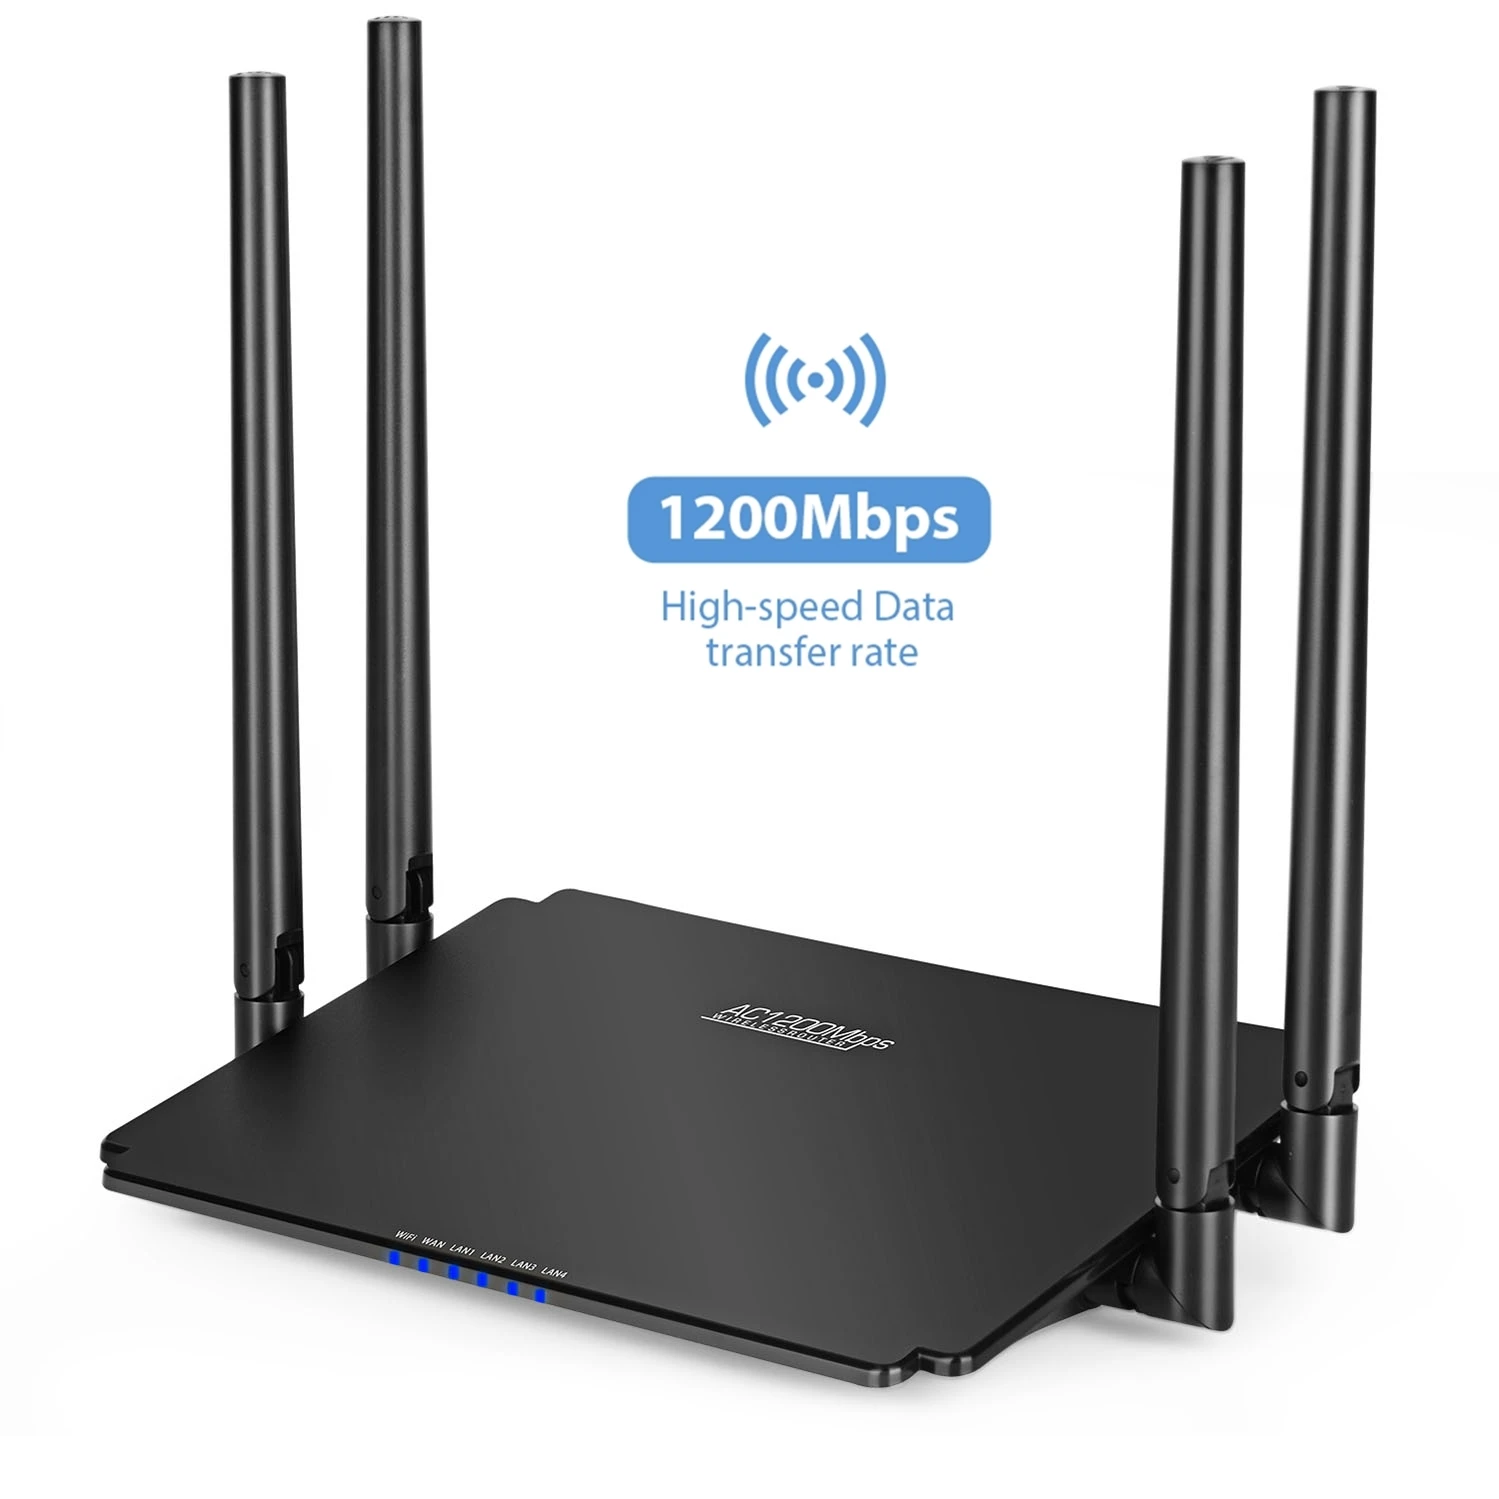 iMice Wifi Router 1200Mbps 2.4G 5G Wireless Router High Speed Dual Band wifi Repeater Access Point Smart APP Control WiFi Router